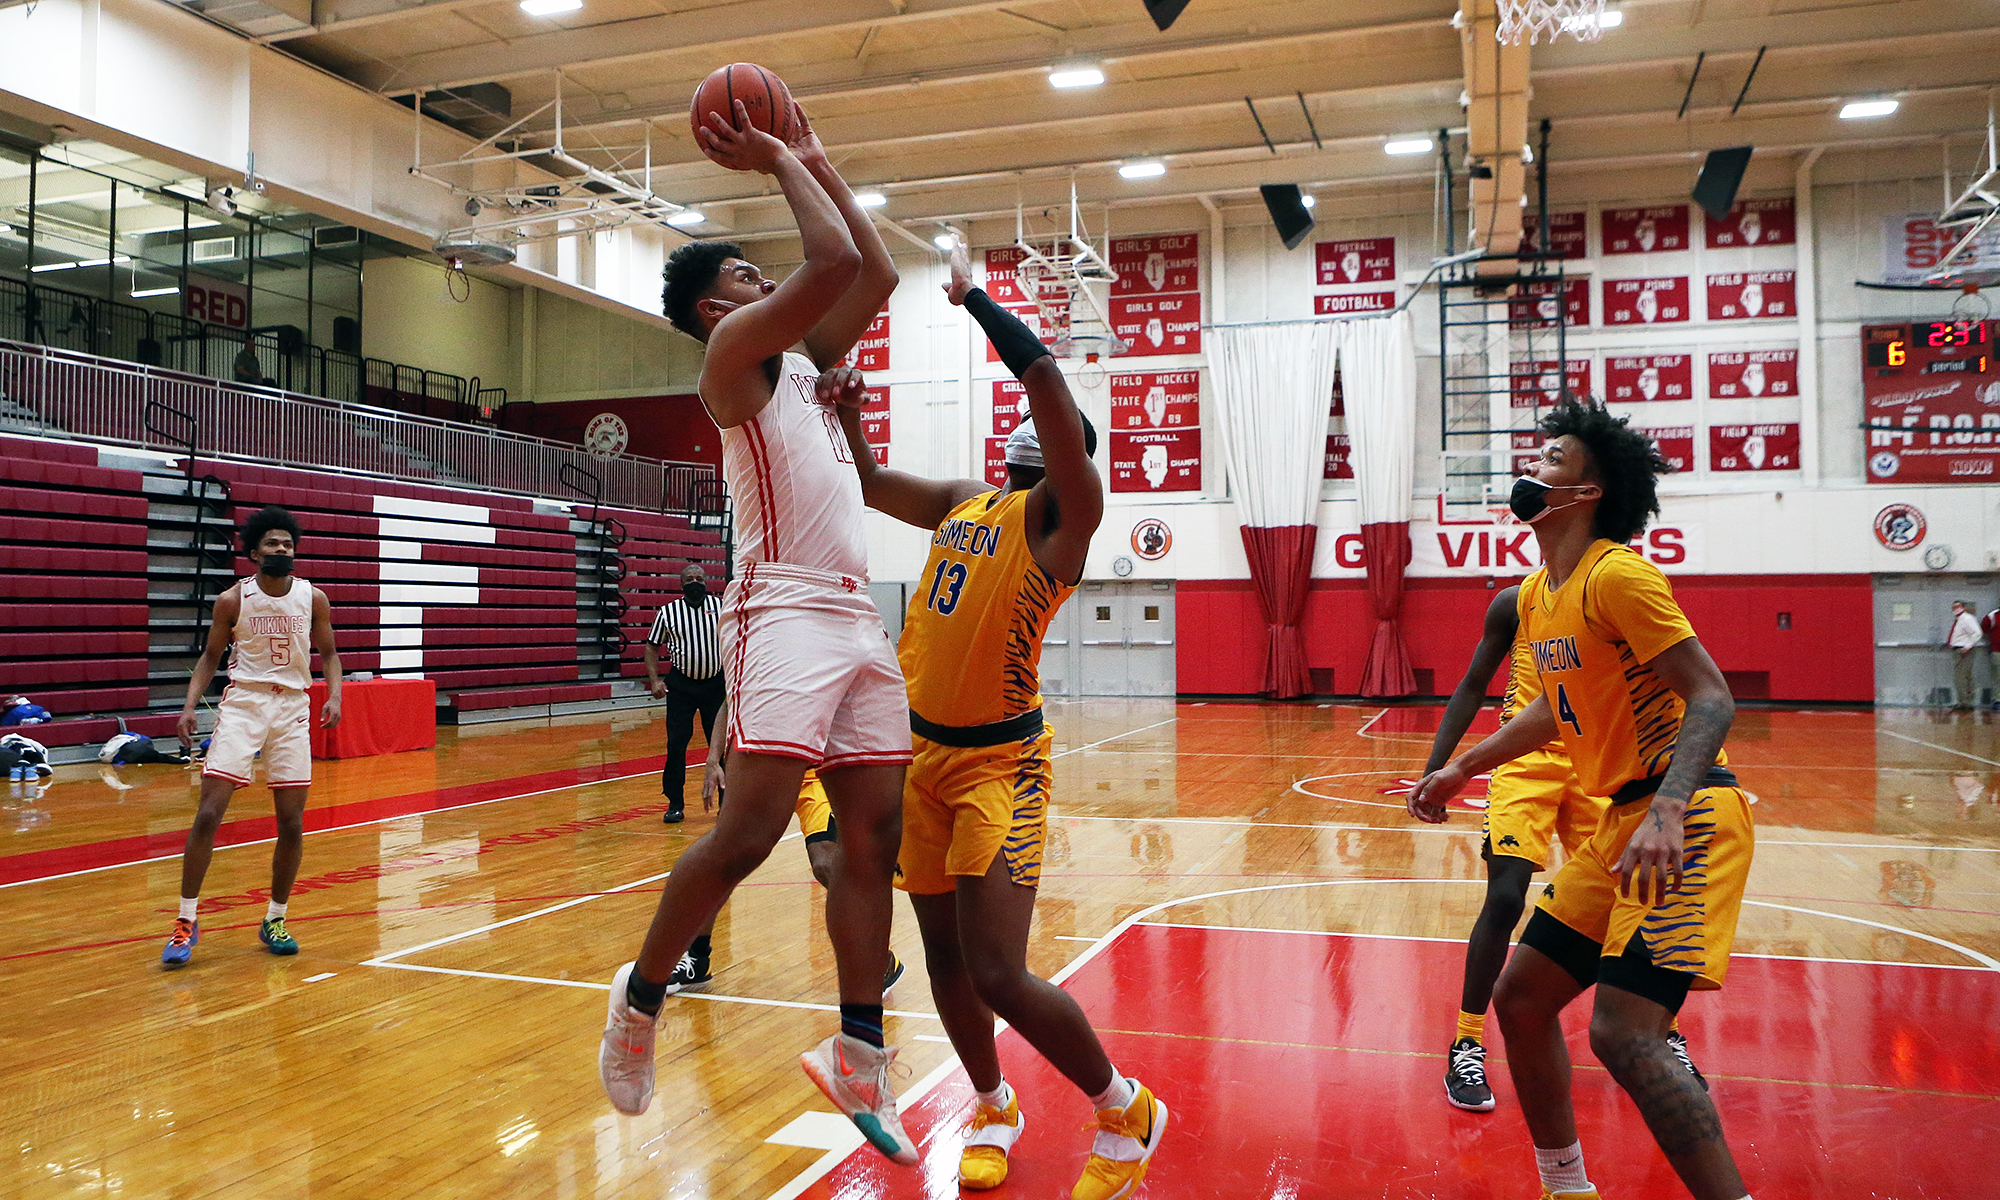 Homewood-Flossmoor’s Chad Ready (11) shoots from close to the basket as Simeon’s Phillip Holmes (13) defends.